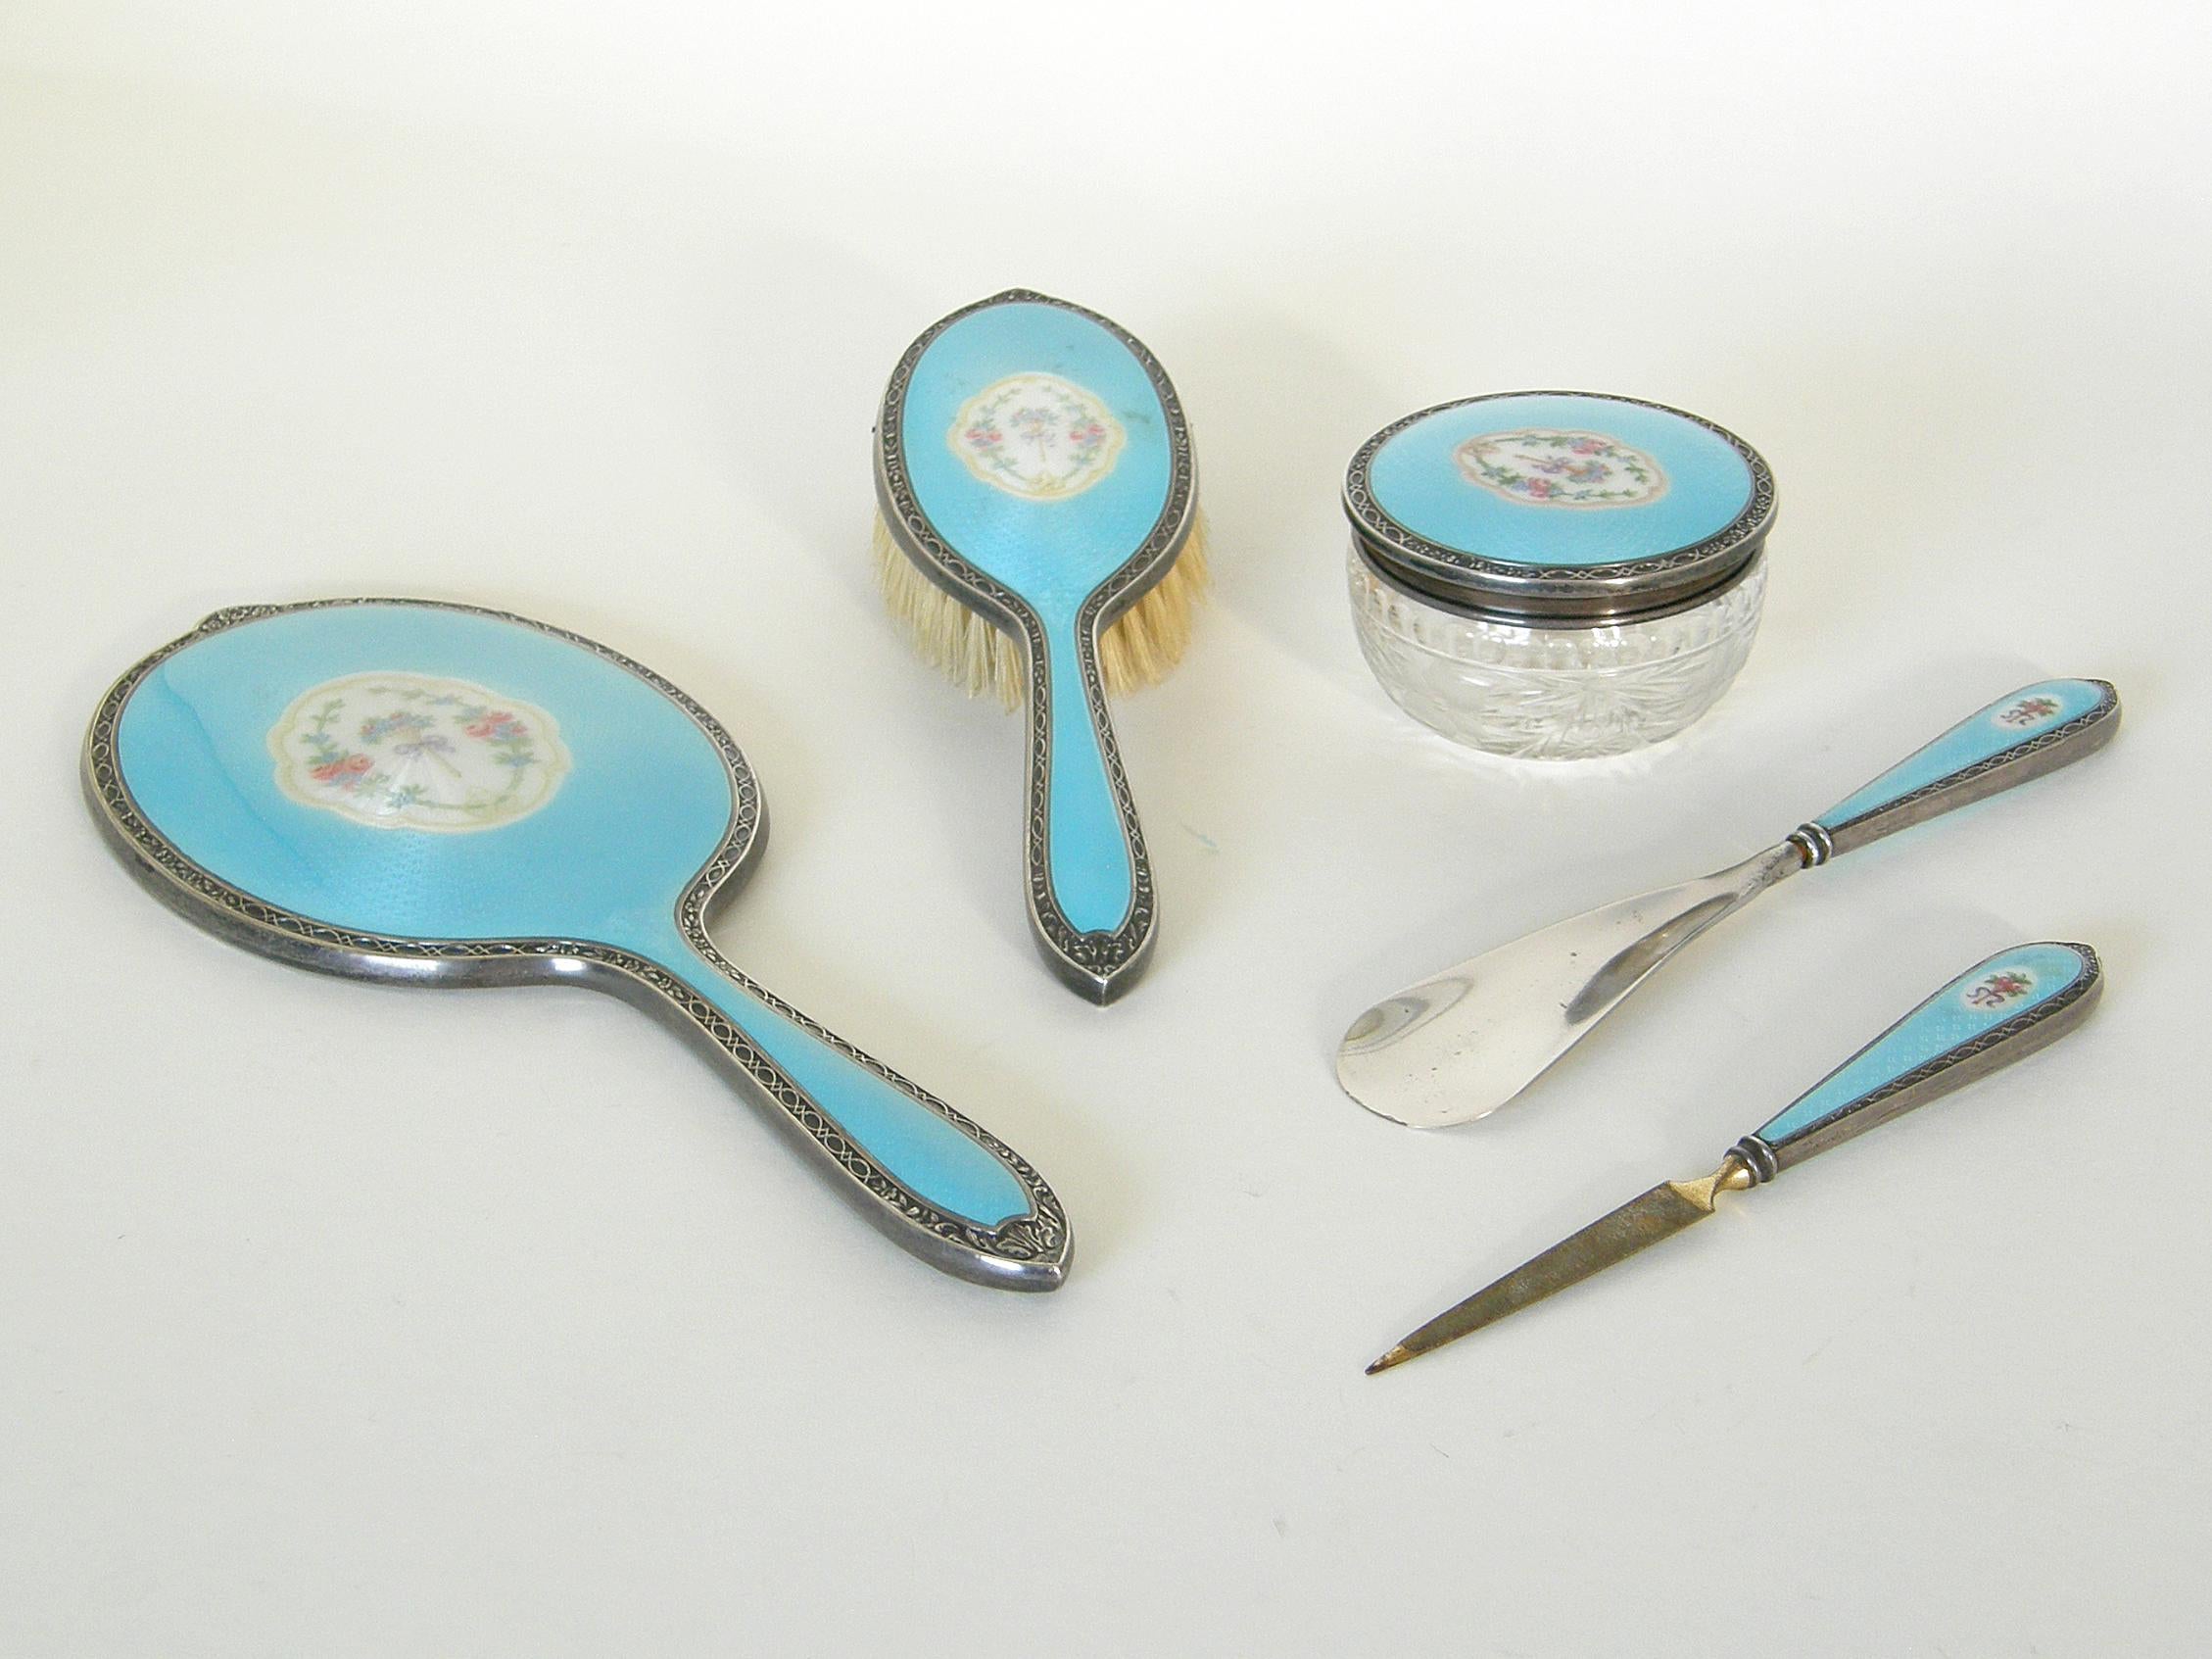 This lovely, antique vanity or dressing table set was made by Theodore W. Foster & Bro., of Providence, Rhode Island. The five-piece set is made of sterling silver with bright, baby blue guilloché enamel. The enamelwork features central medallions